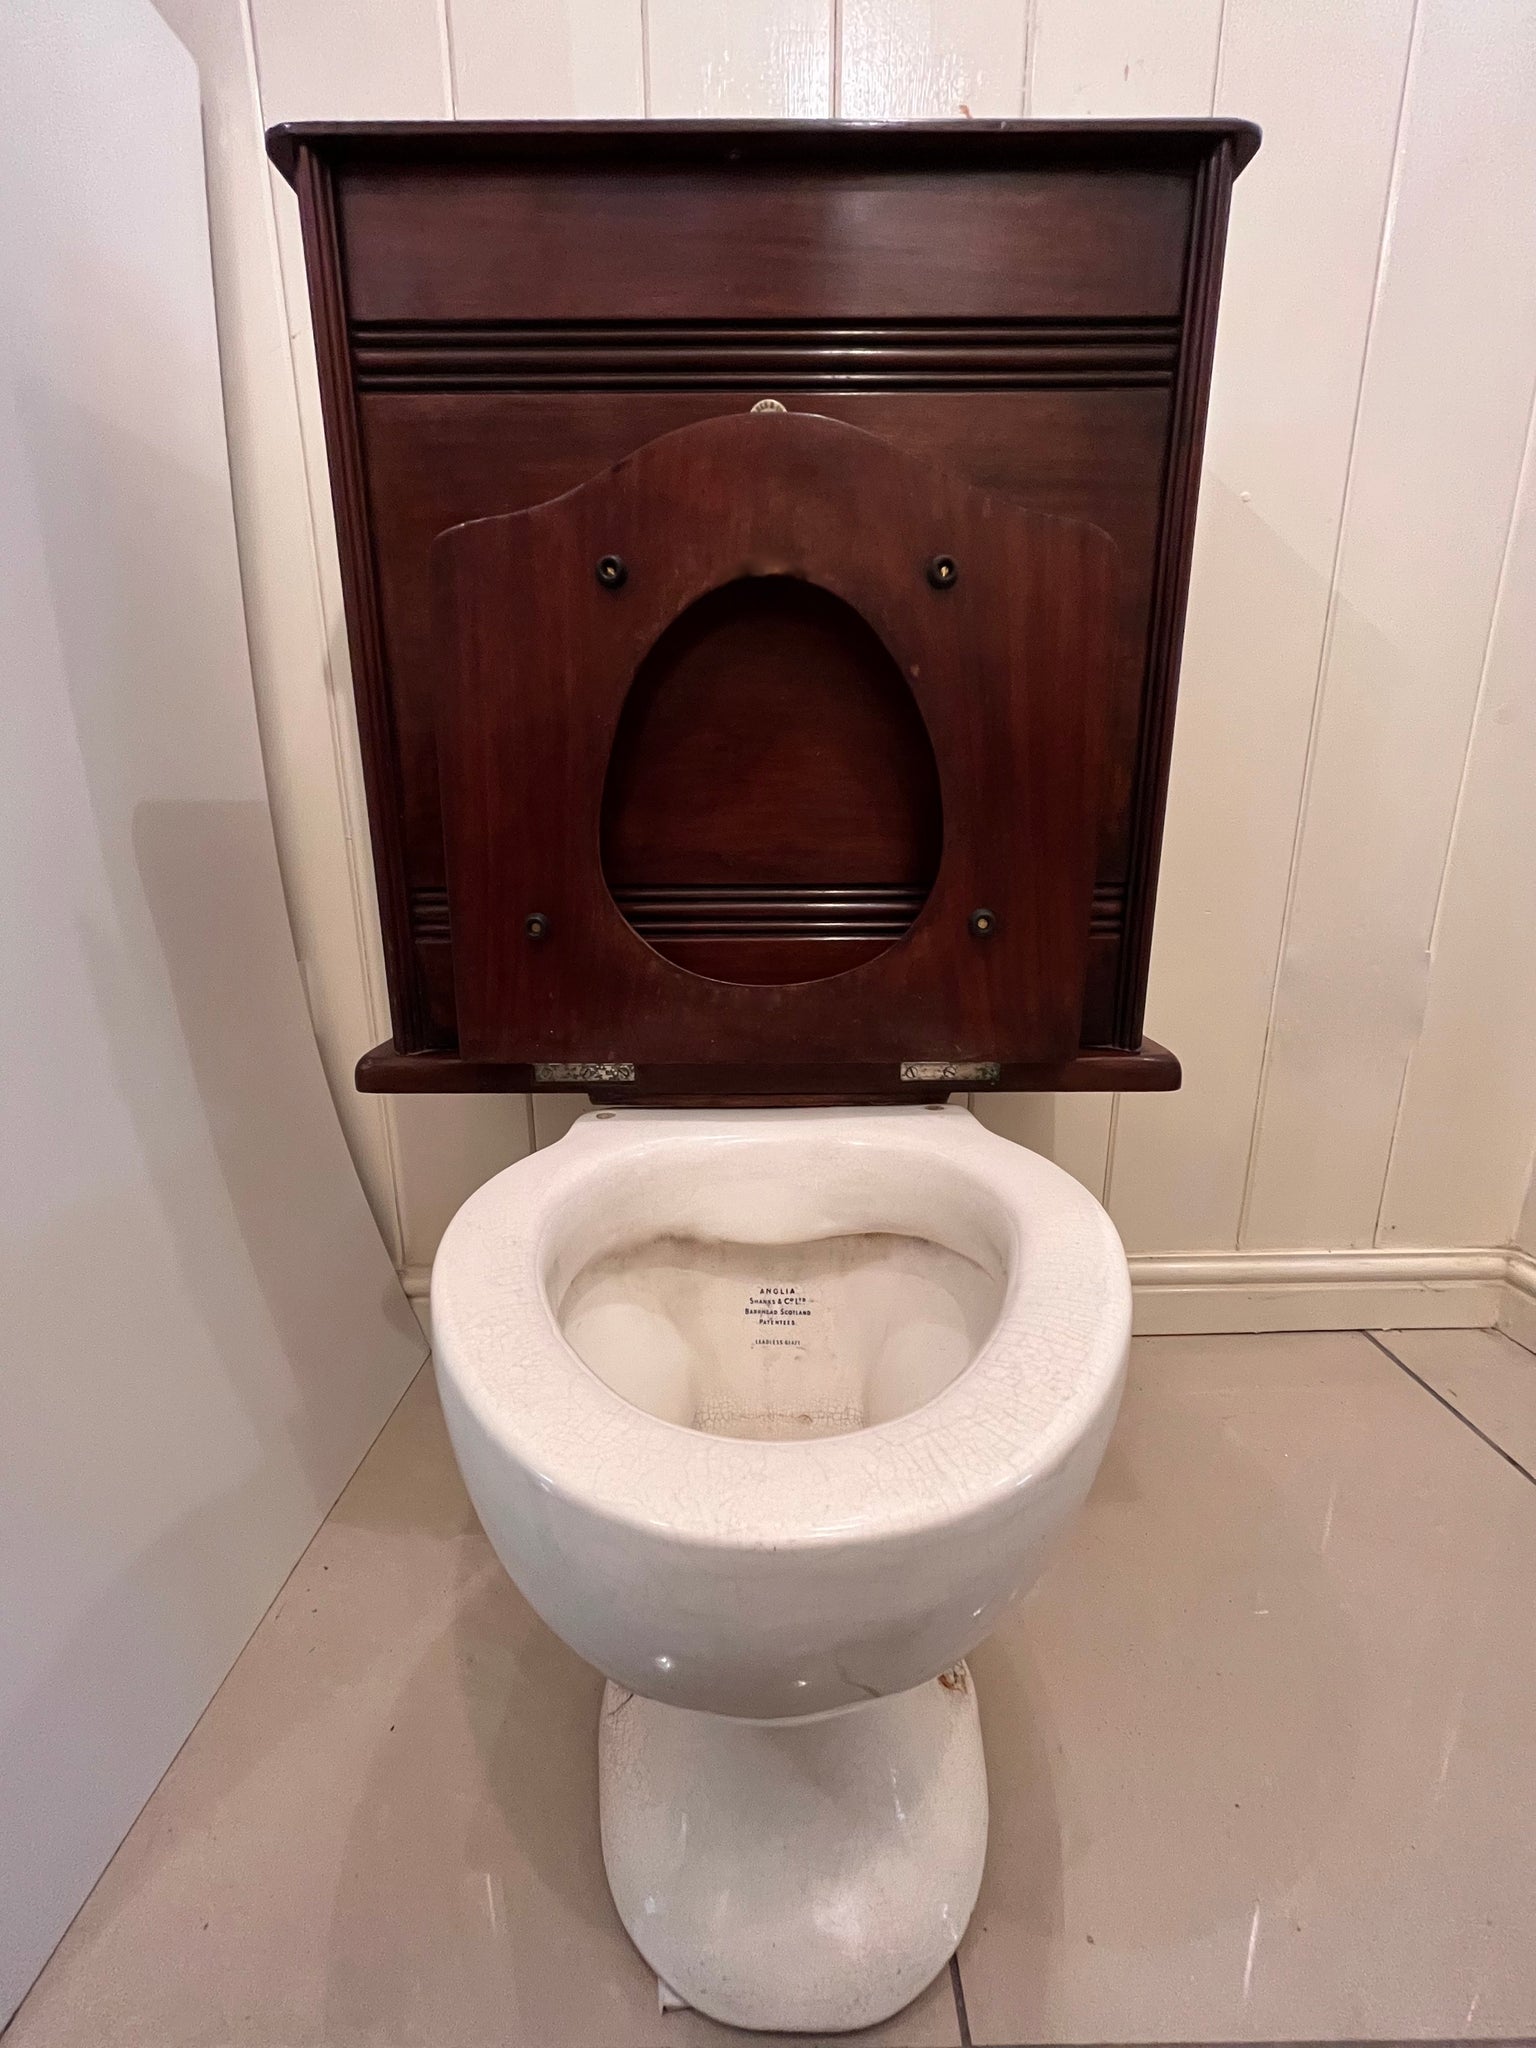 "ANGLIA" Washdown Closet by Shanks & Co Ltd C.1900 with a Mahogany Boxed in Cast Iron Cistern